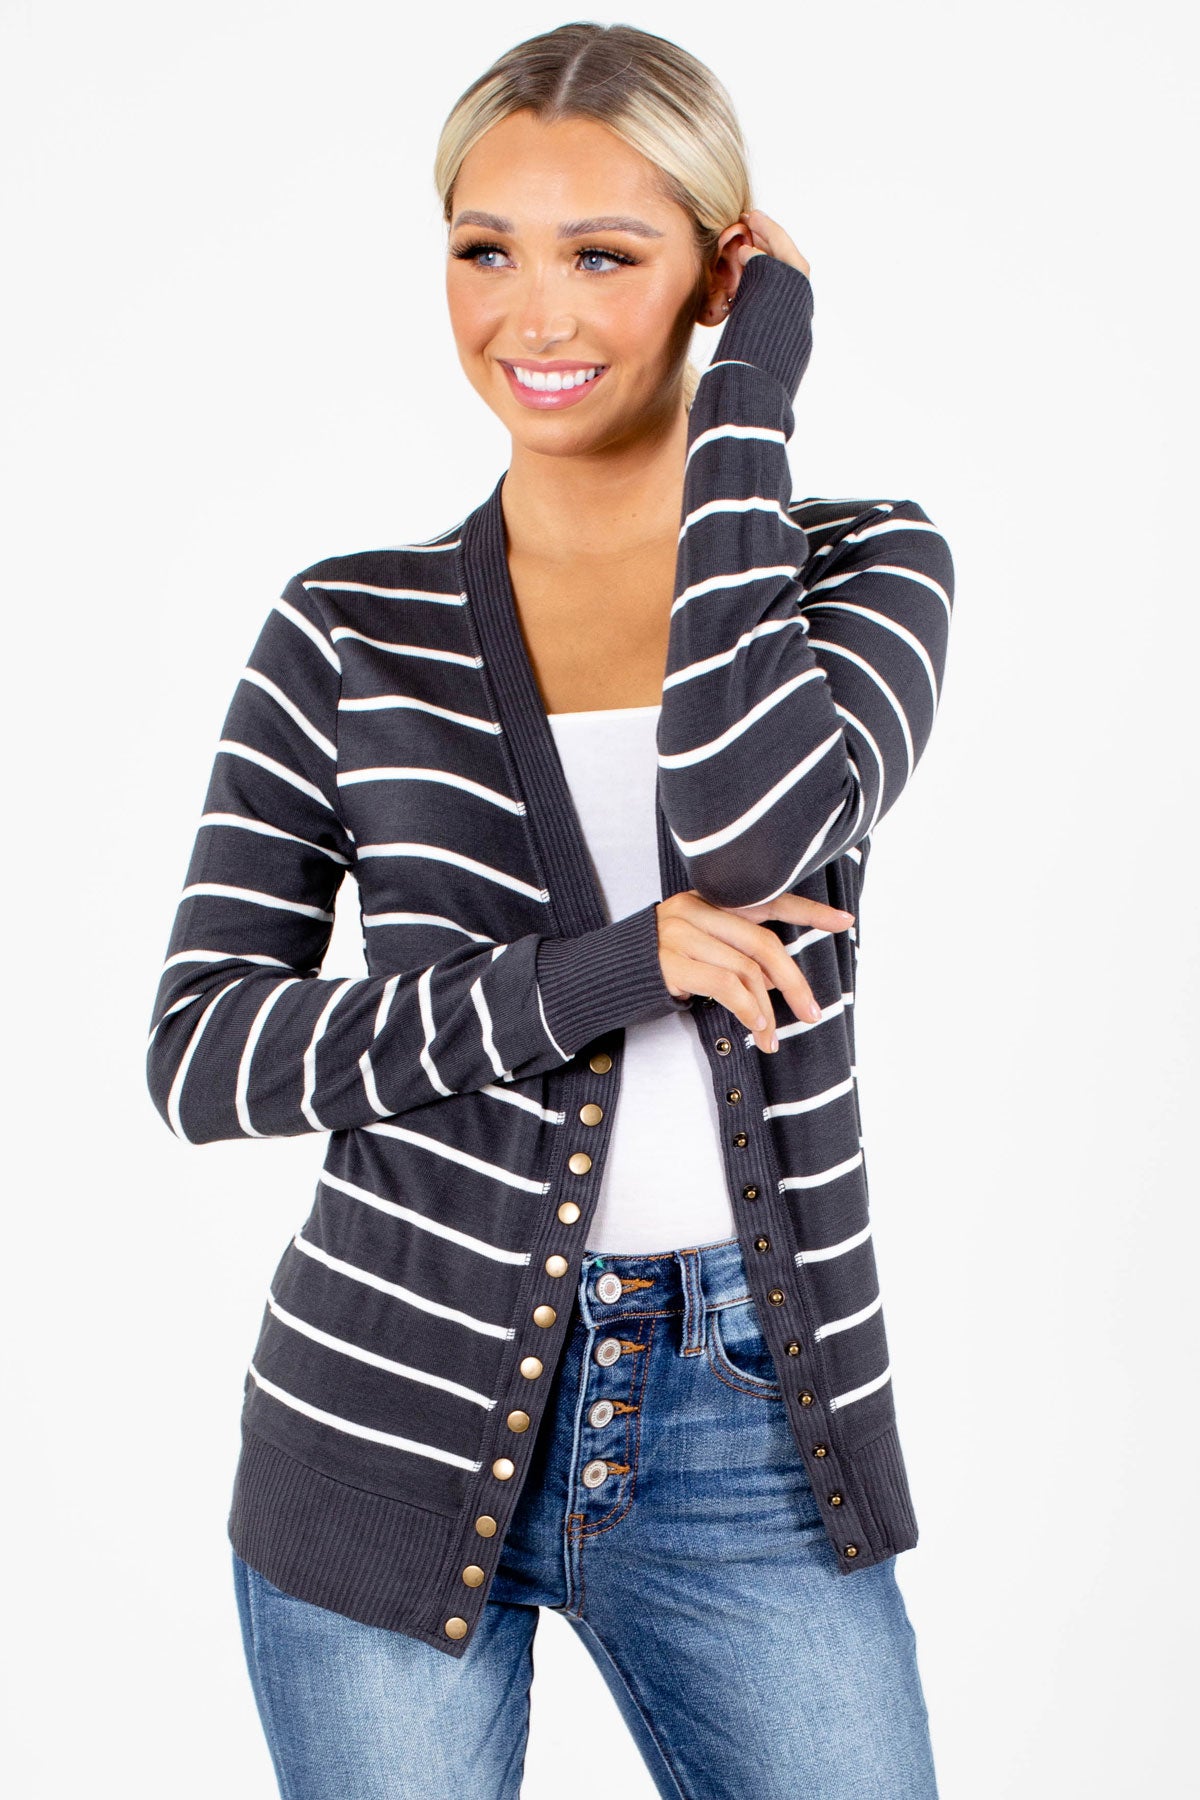 Charcoal Striped Pattern Boutique Cardigans for Women